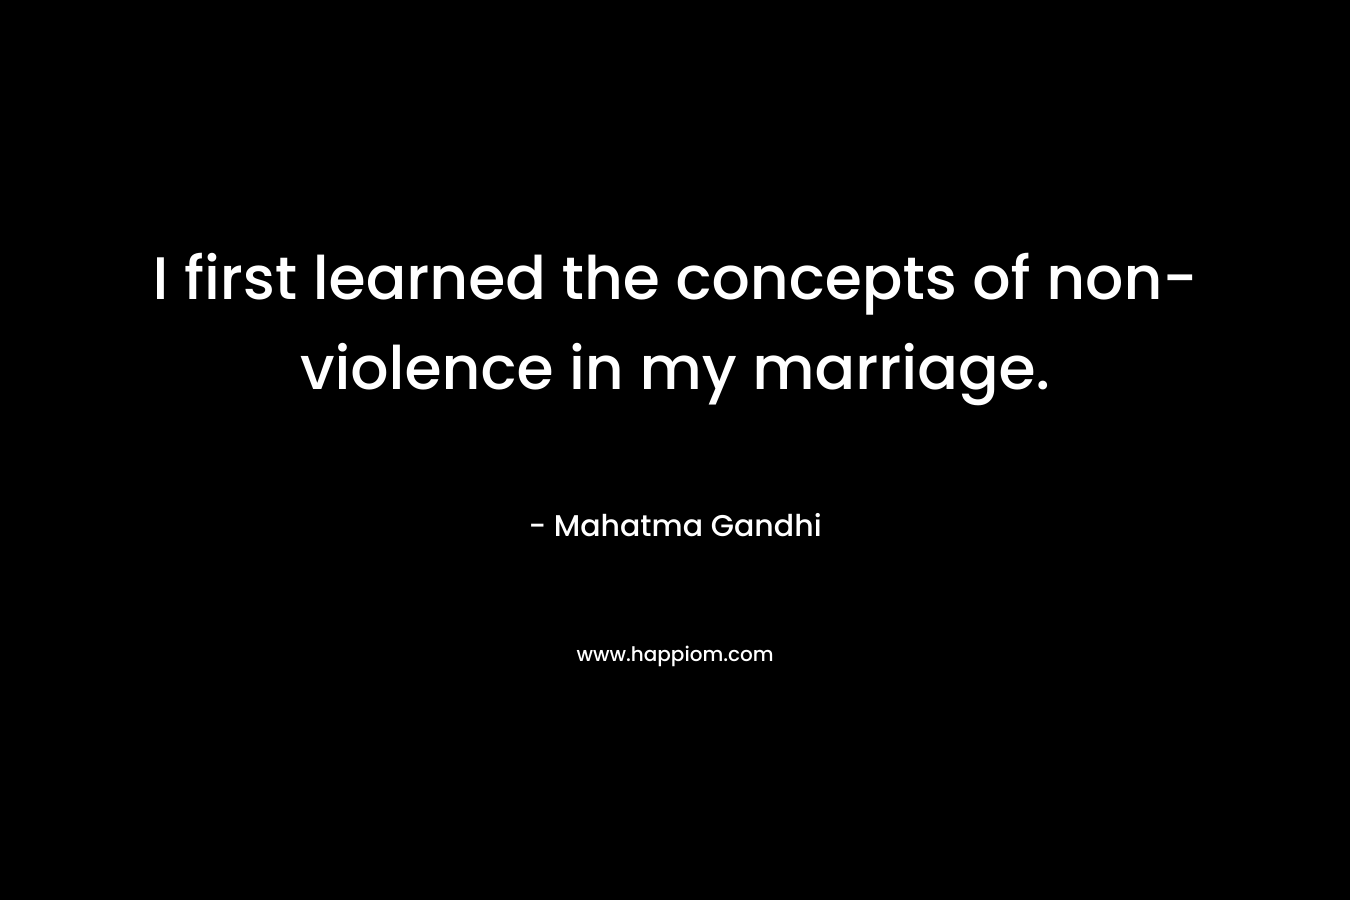 I first learned the concepts of non-violence in my marriage.